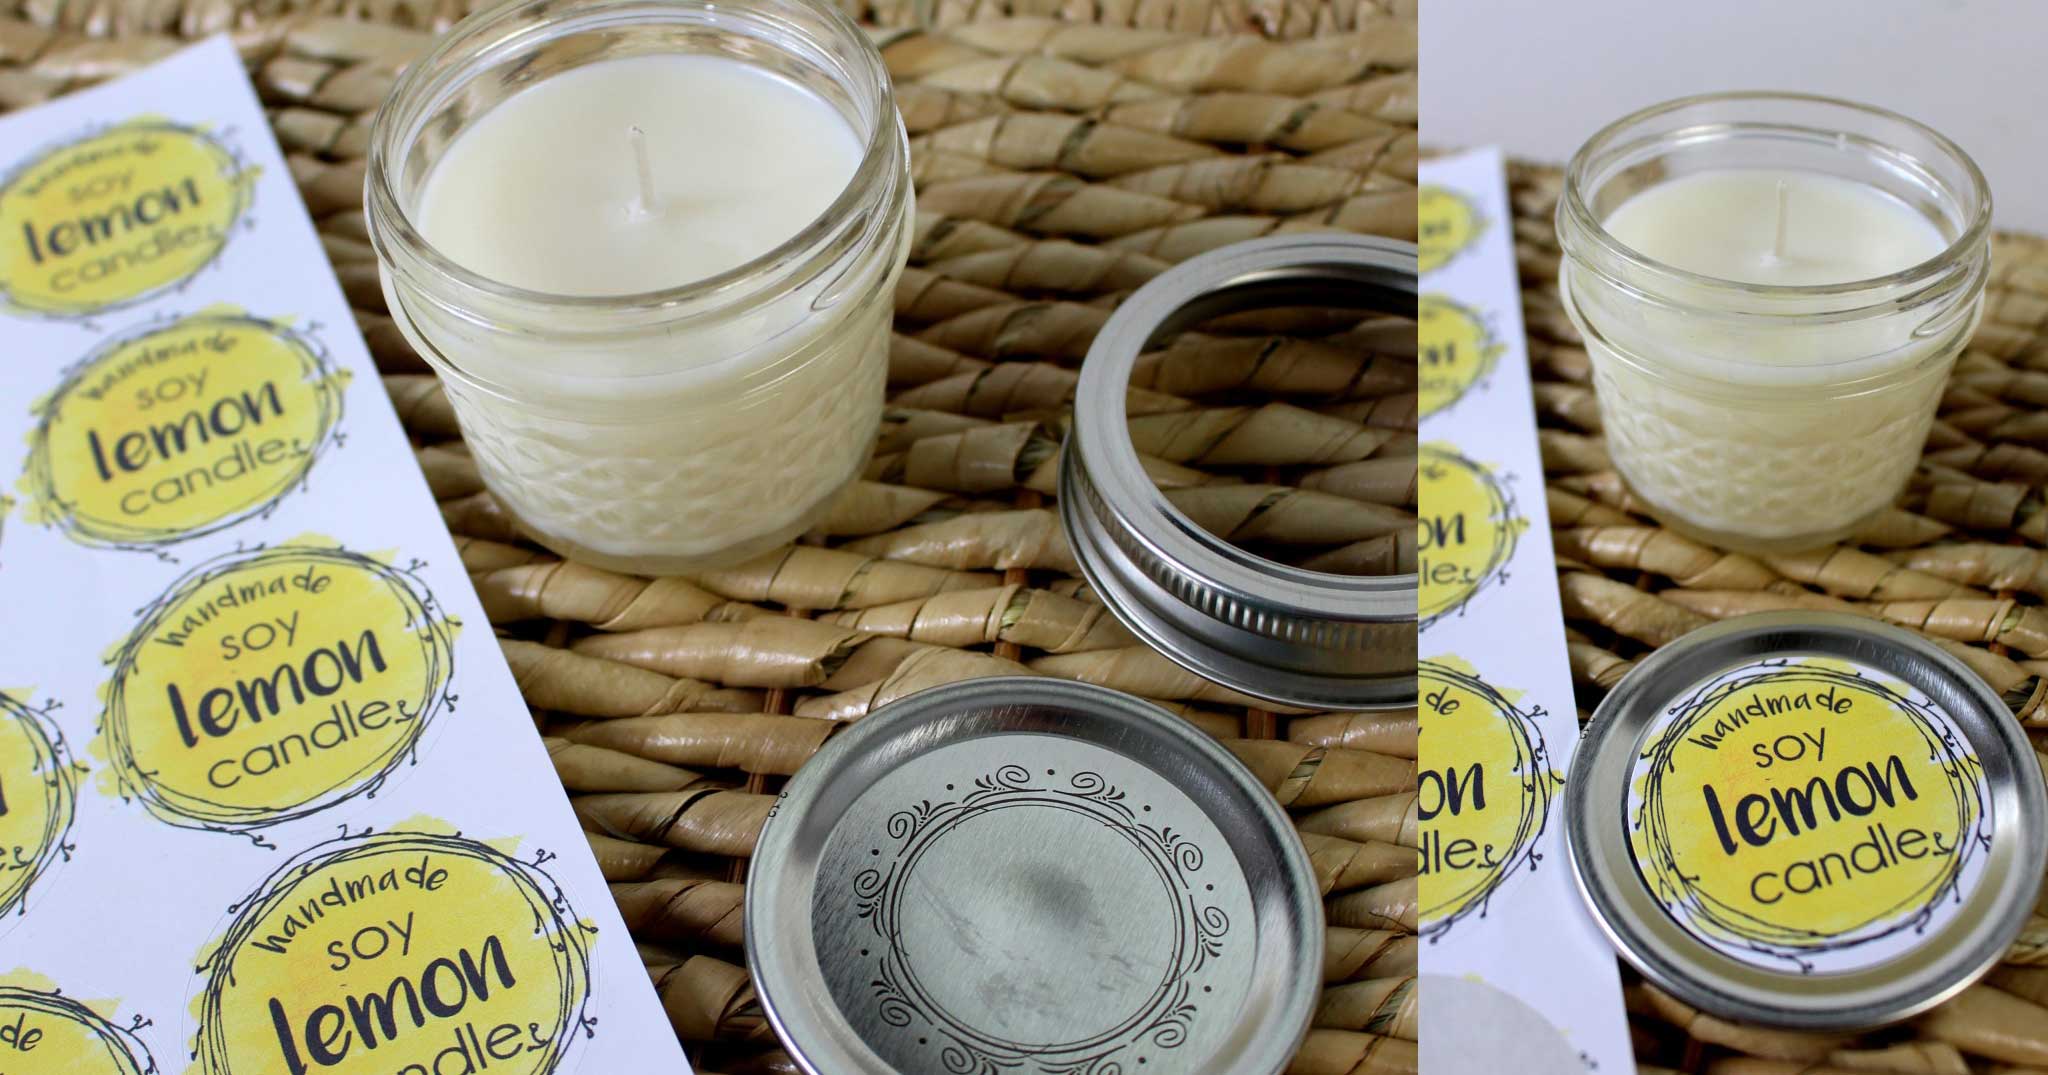 DIY soy candles: Top off your candle with a lid label